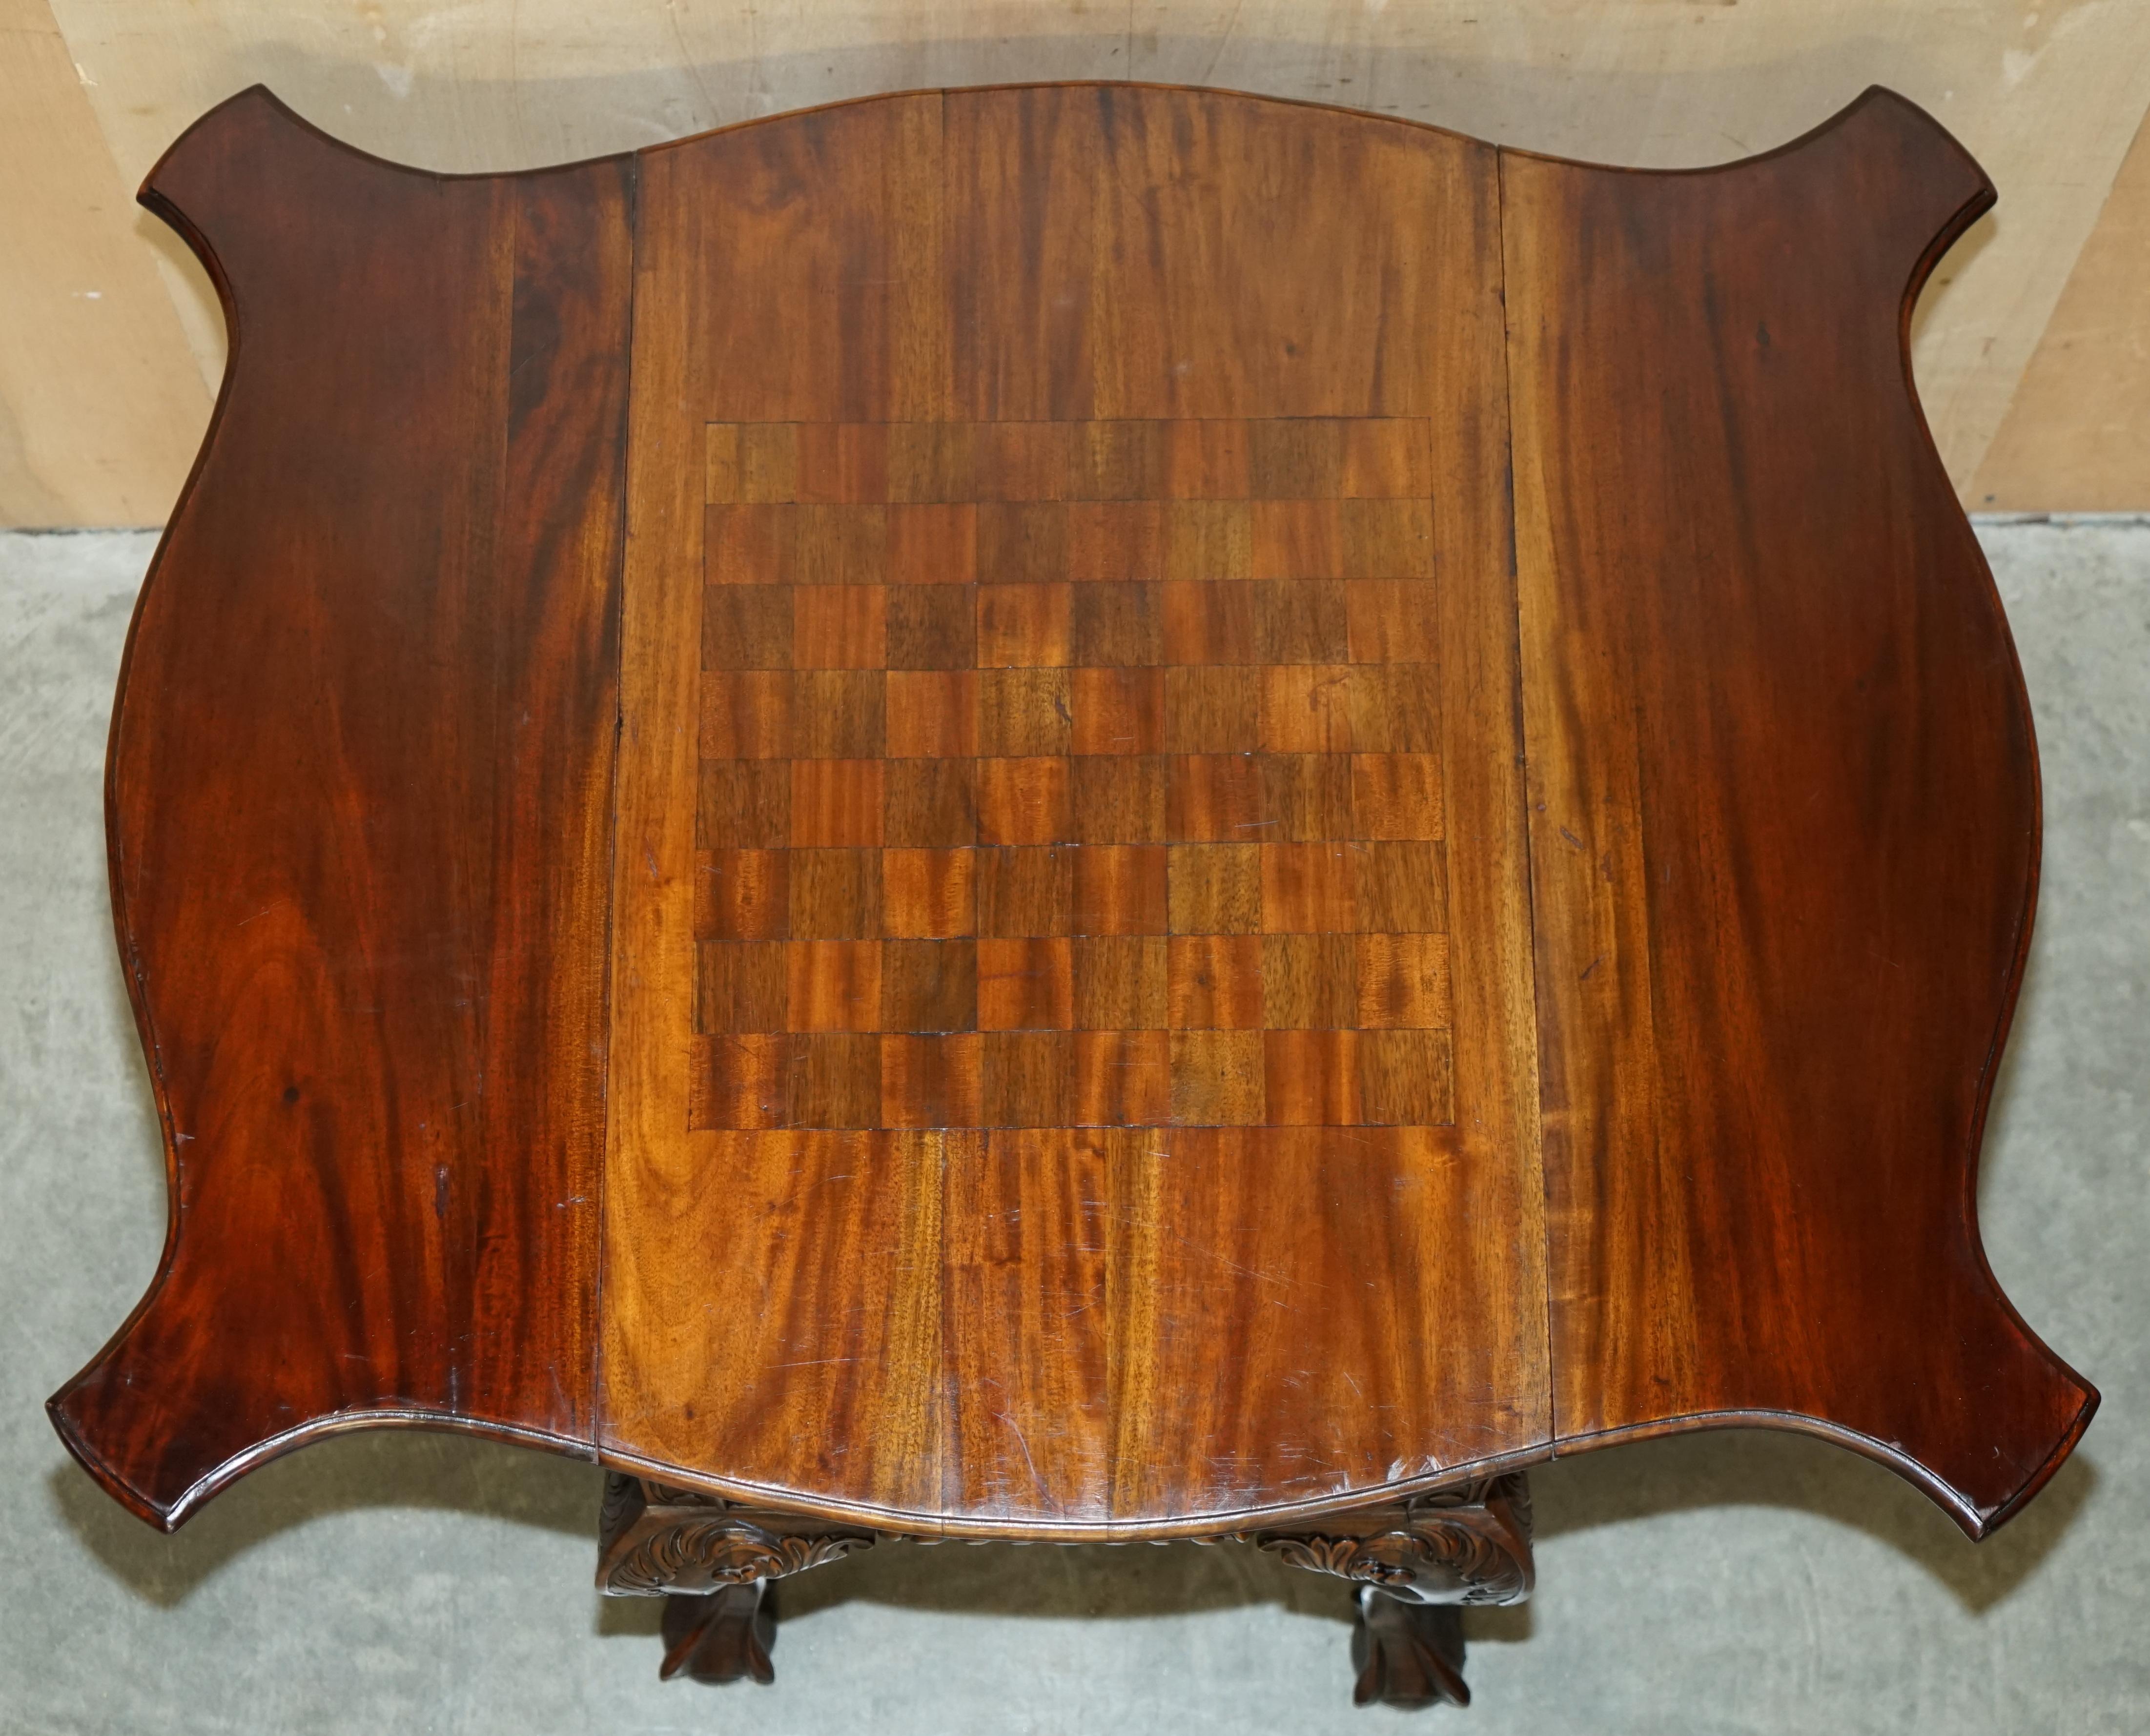 EXQUISITE TABLE DE CHESSAGE A PIEDS The Claw & Ball EXTENDiNG CHESS BOARD STYLE Thomas Chippendale en vente 3